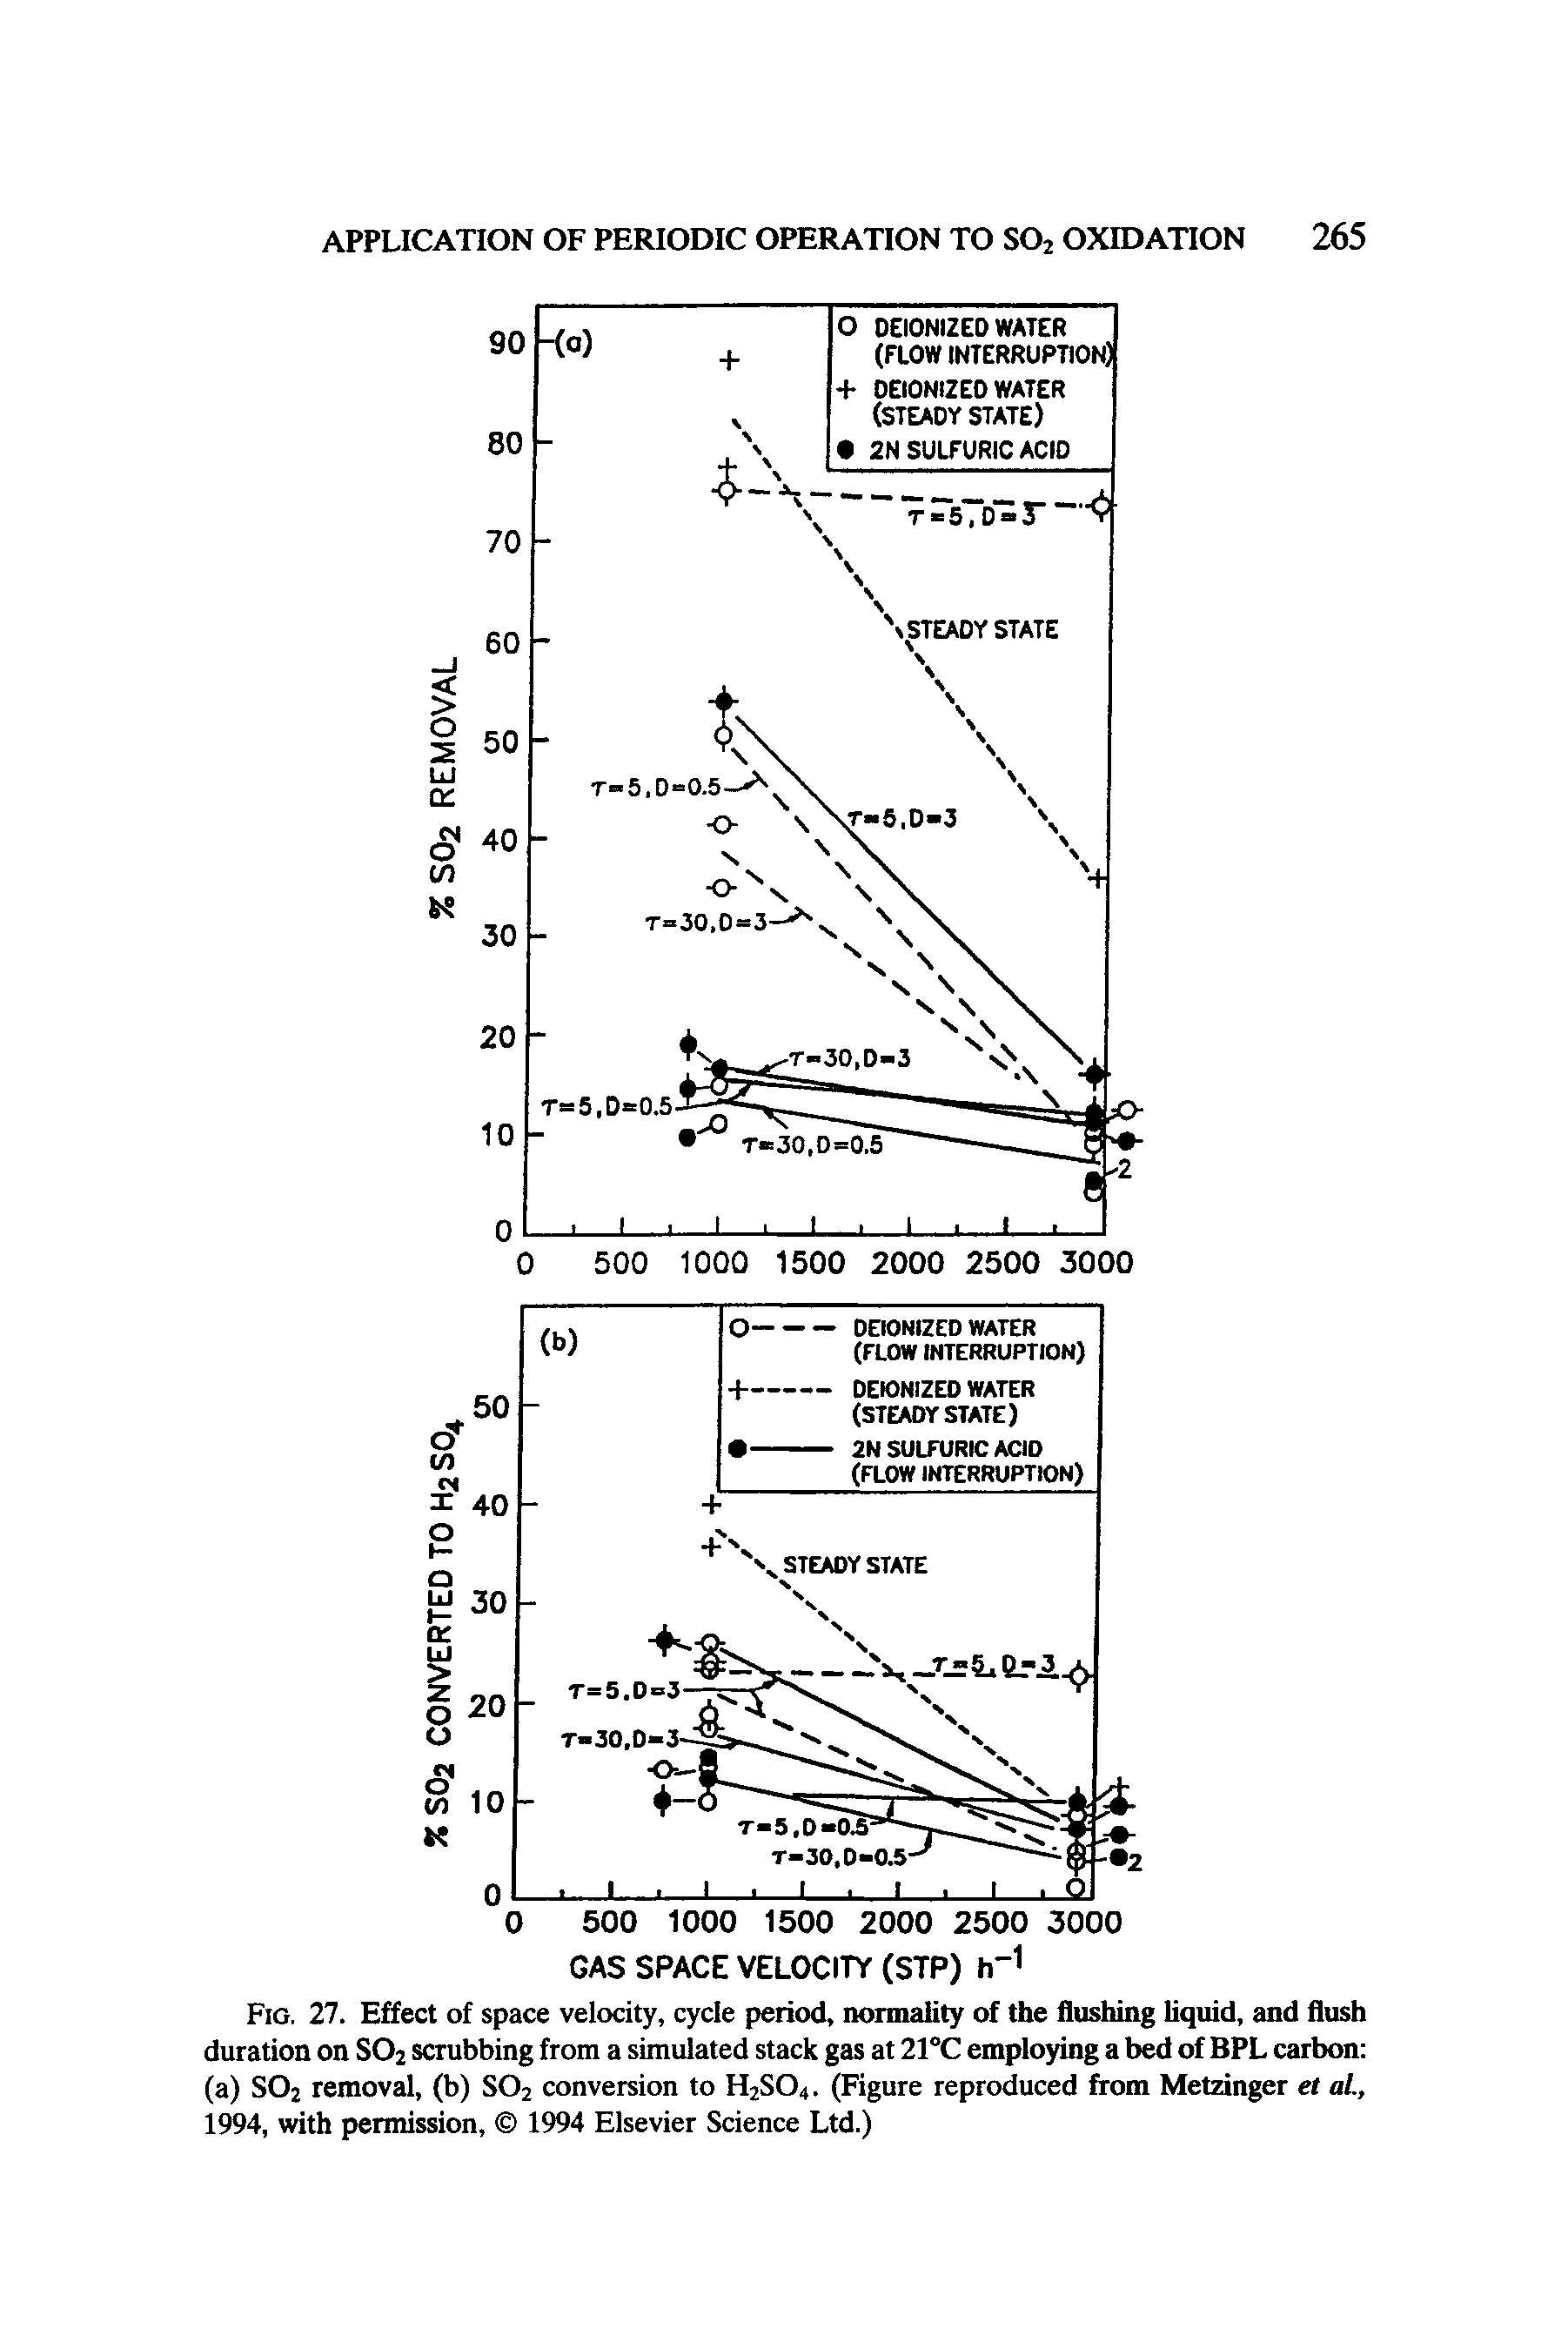 Fig. 27. Effect of space velocity, cycle period, normality of the flushing liquid, and flush duration on S02 scrubbing from a simulated stack gas at 21°C employing a bed of BPL carbon (a) S02 removal, (b) S02 conversion to H2S04. (Figure reproduced from Metzinger et al., 1994, with permission, 1994 Elsevier Science Ltd.)...